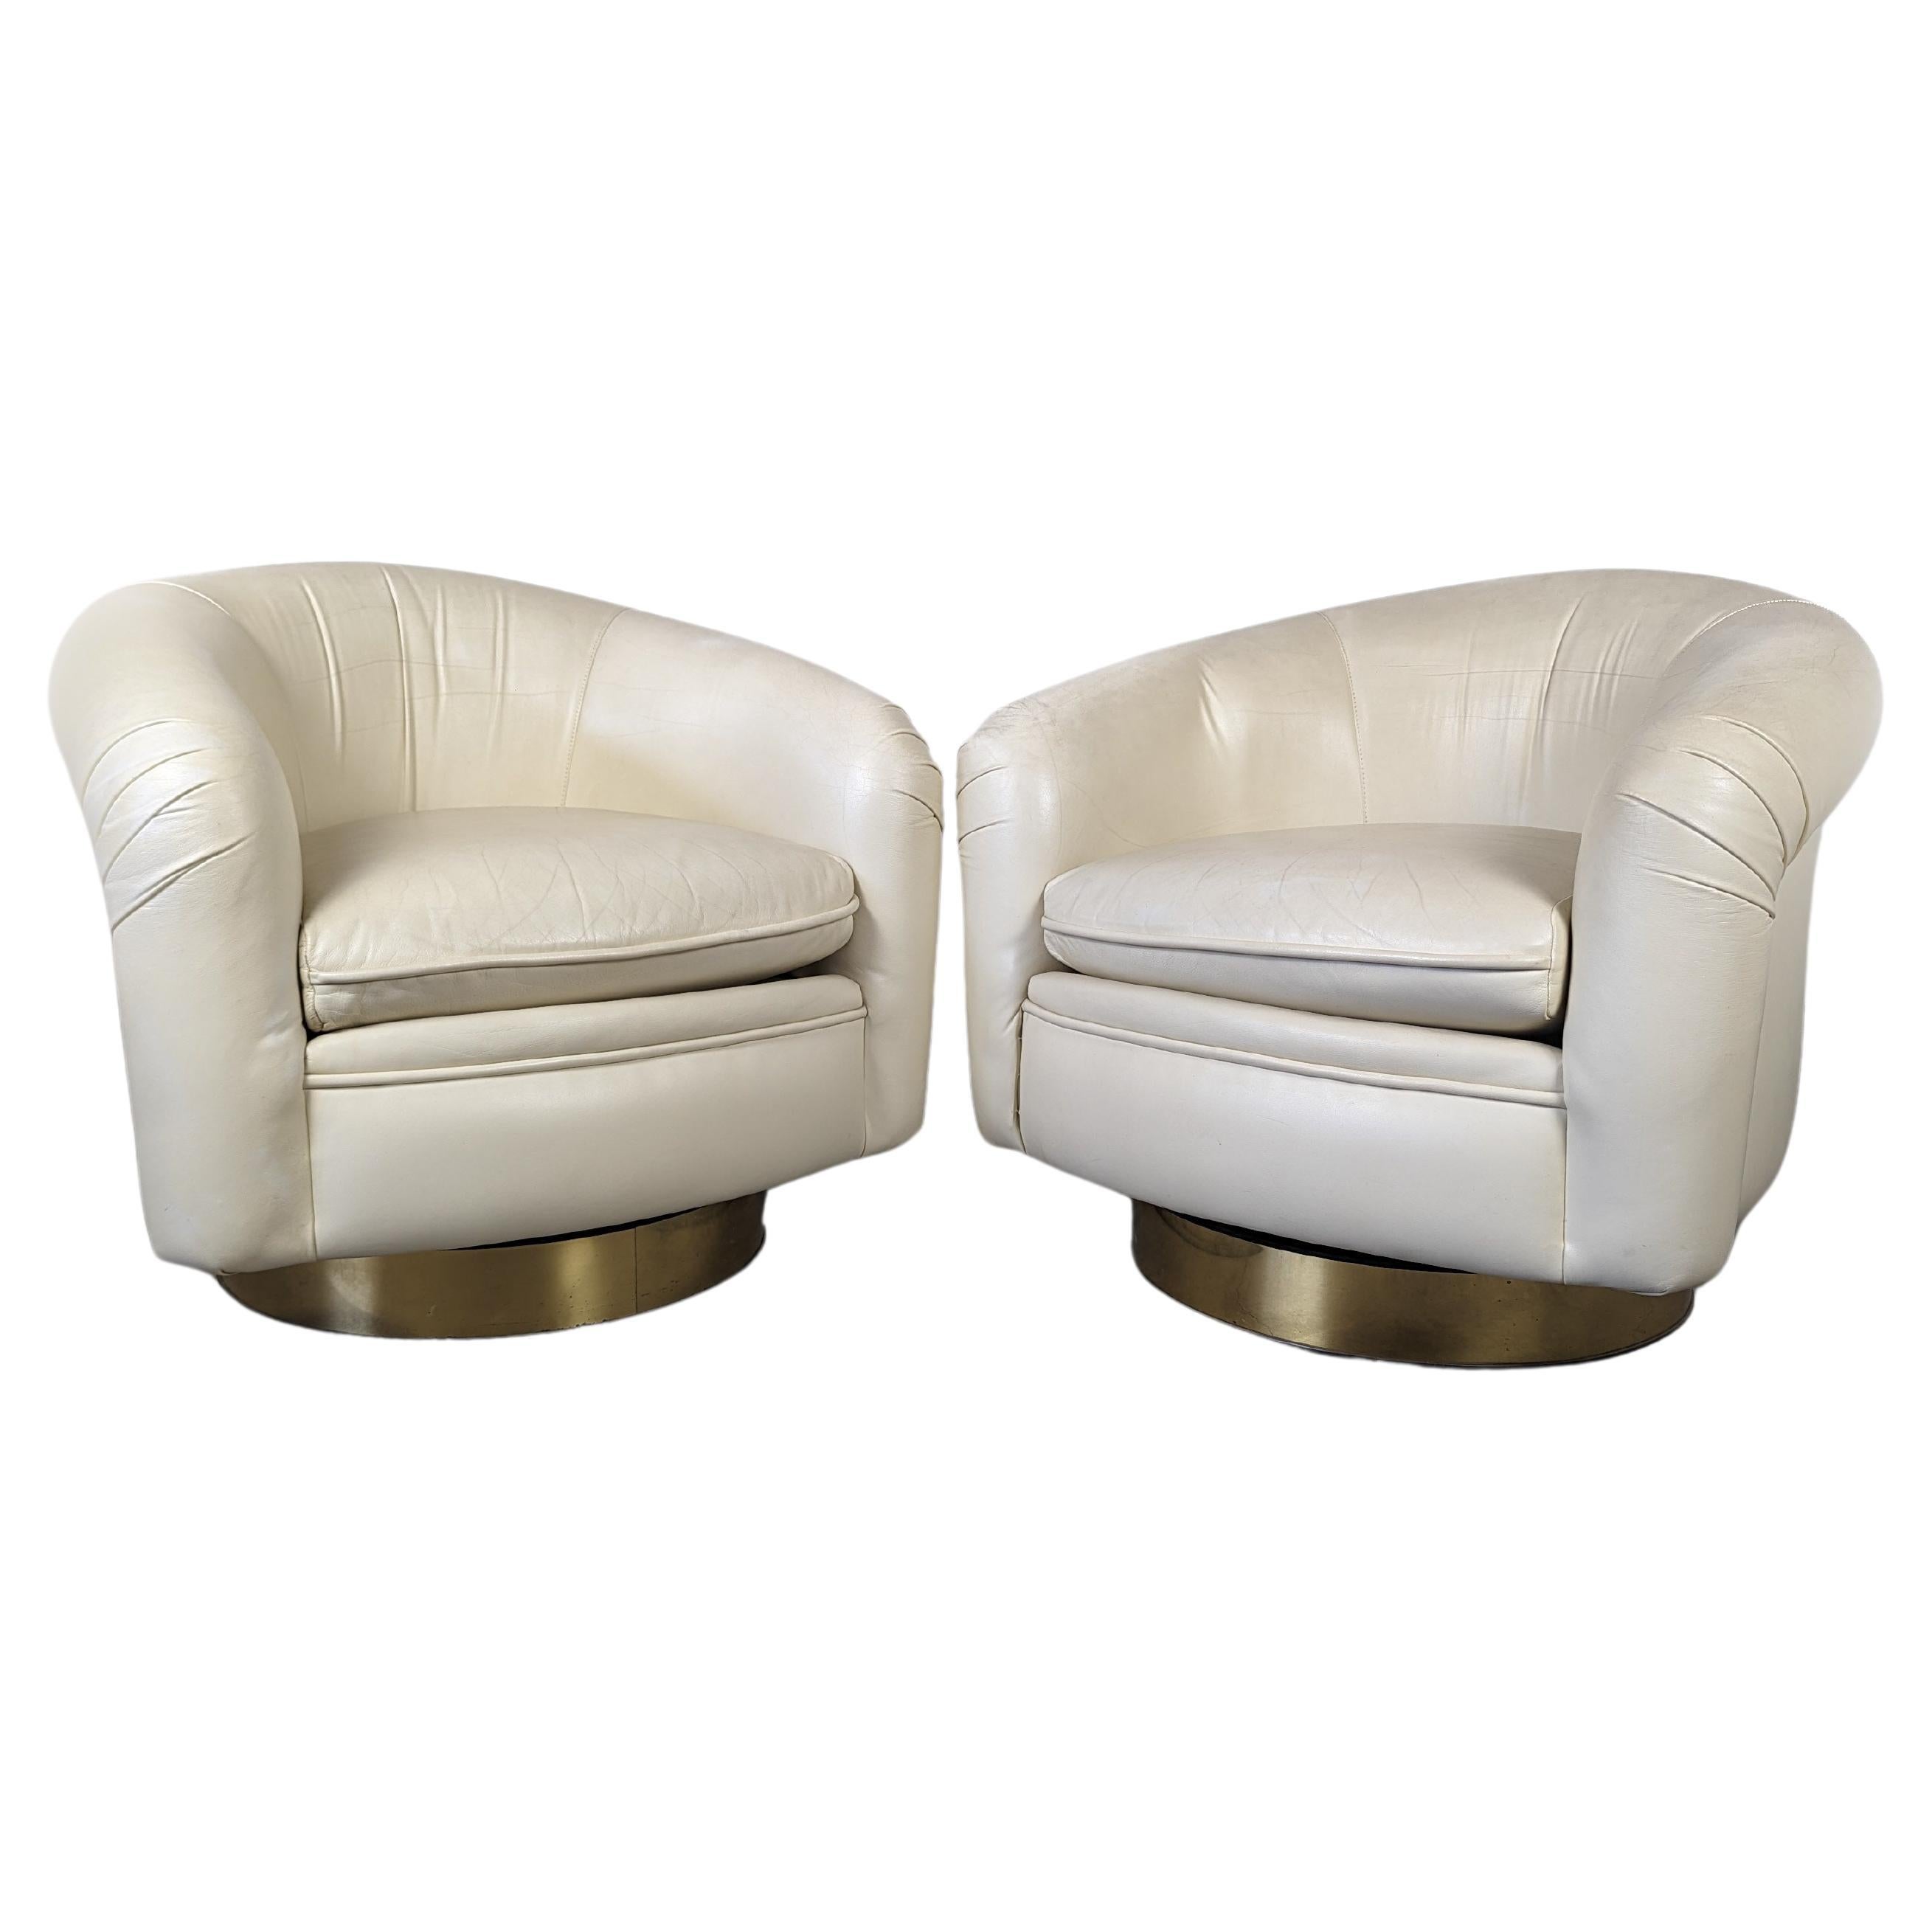 Leather Tilt Swivel Lounge Chairs by Milo Baughman for Thayer Coggin, c1970s For Sale